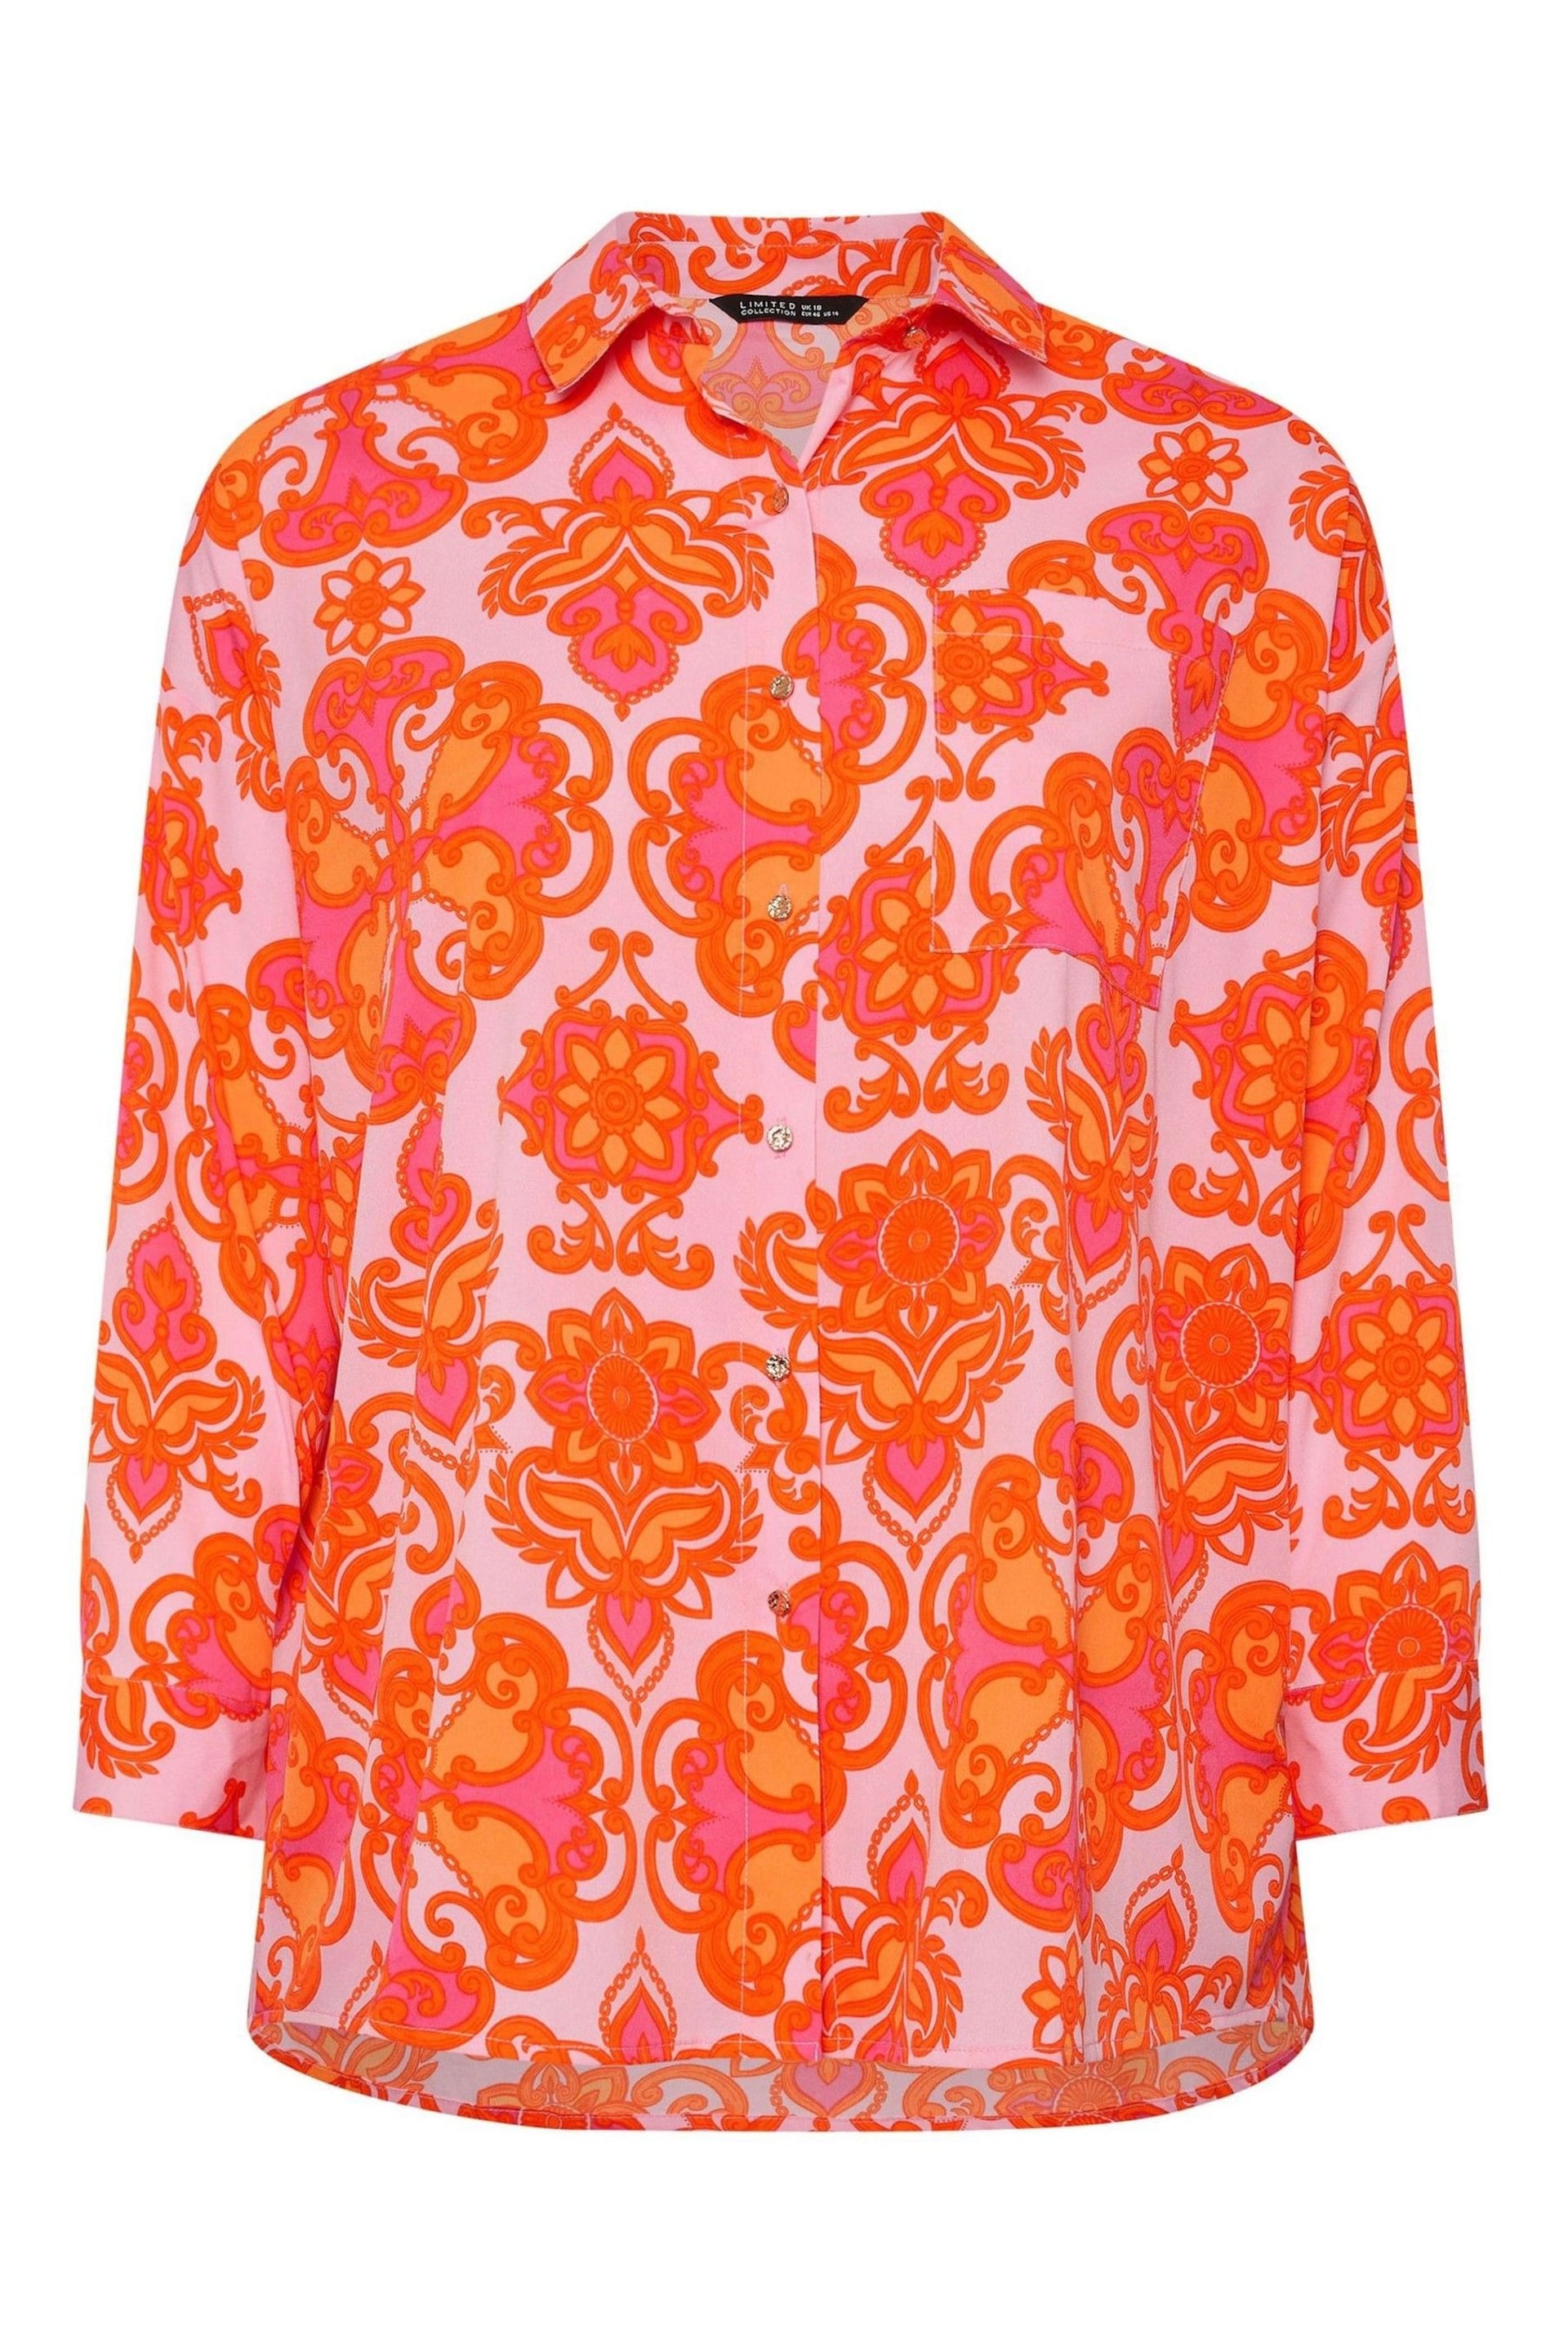 Yours Curve Orange Abstract Print Shirt - Image 6 of 6